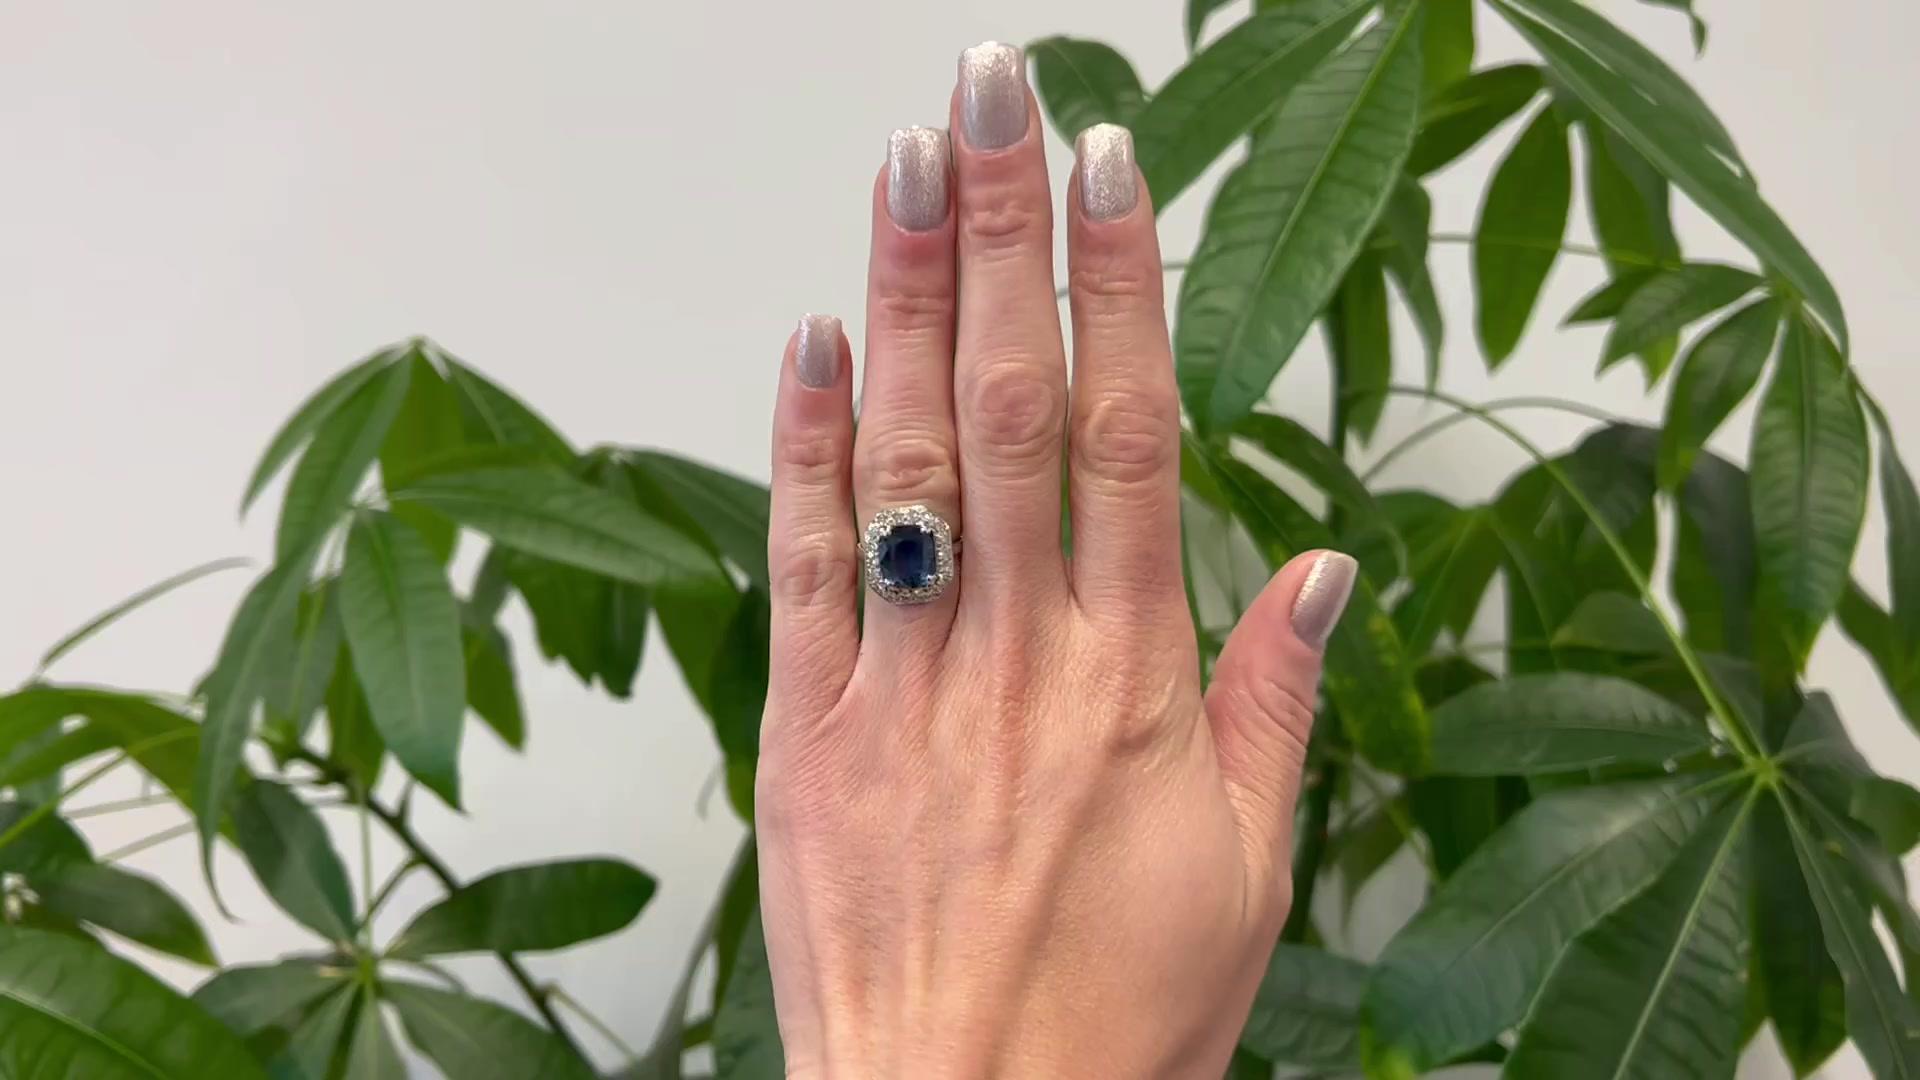 One Art Deco GIA Thai Sapphire and Diamond Platinum Ring. Featuring one GIA oval mixed cut sapphire weighing approximately 3.85 carats, accompanied with GIA #5221947026 stating the sapphire is of Thai origin. Accented by 18 single cut diamonds with